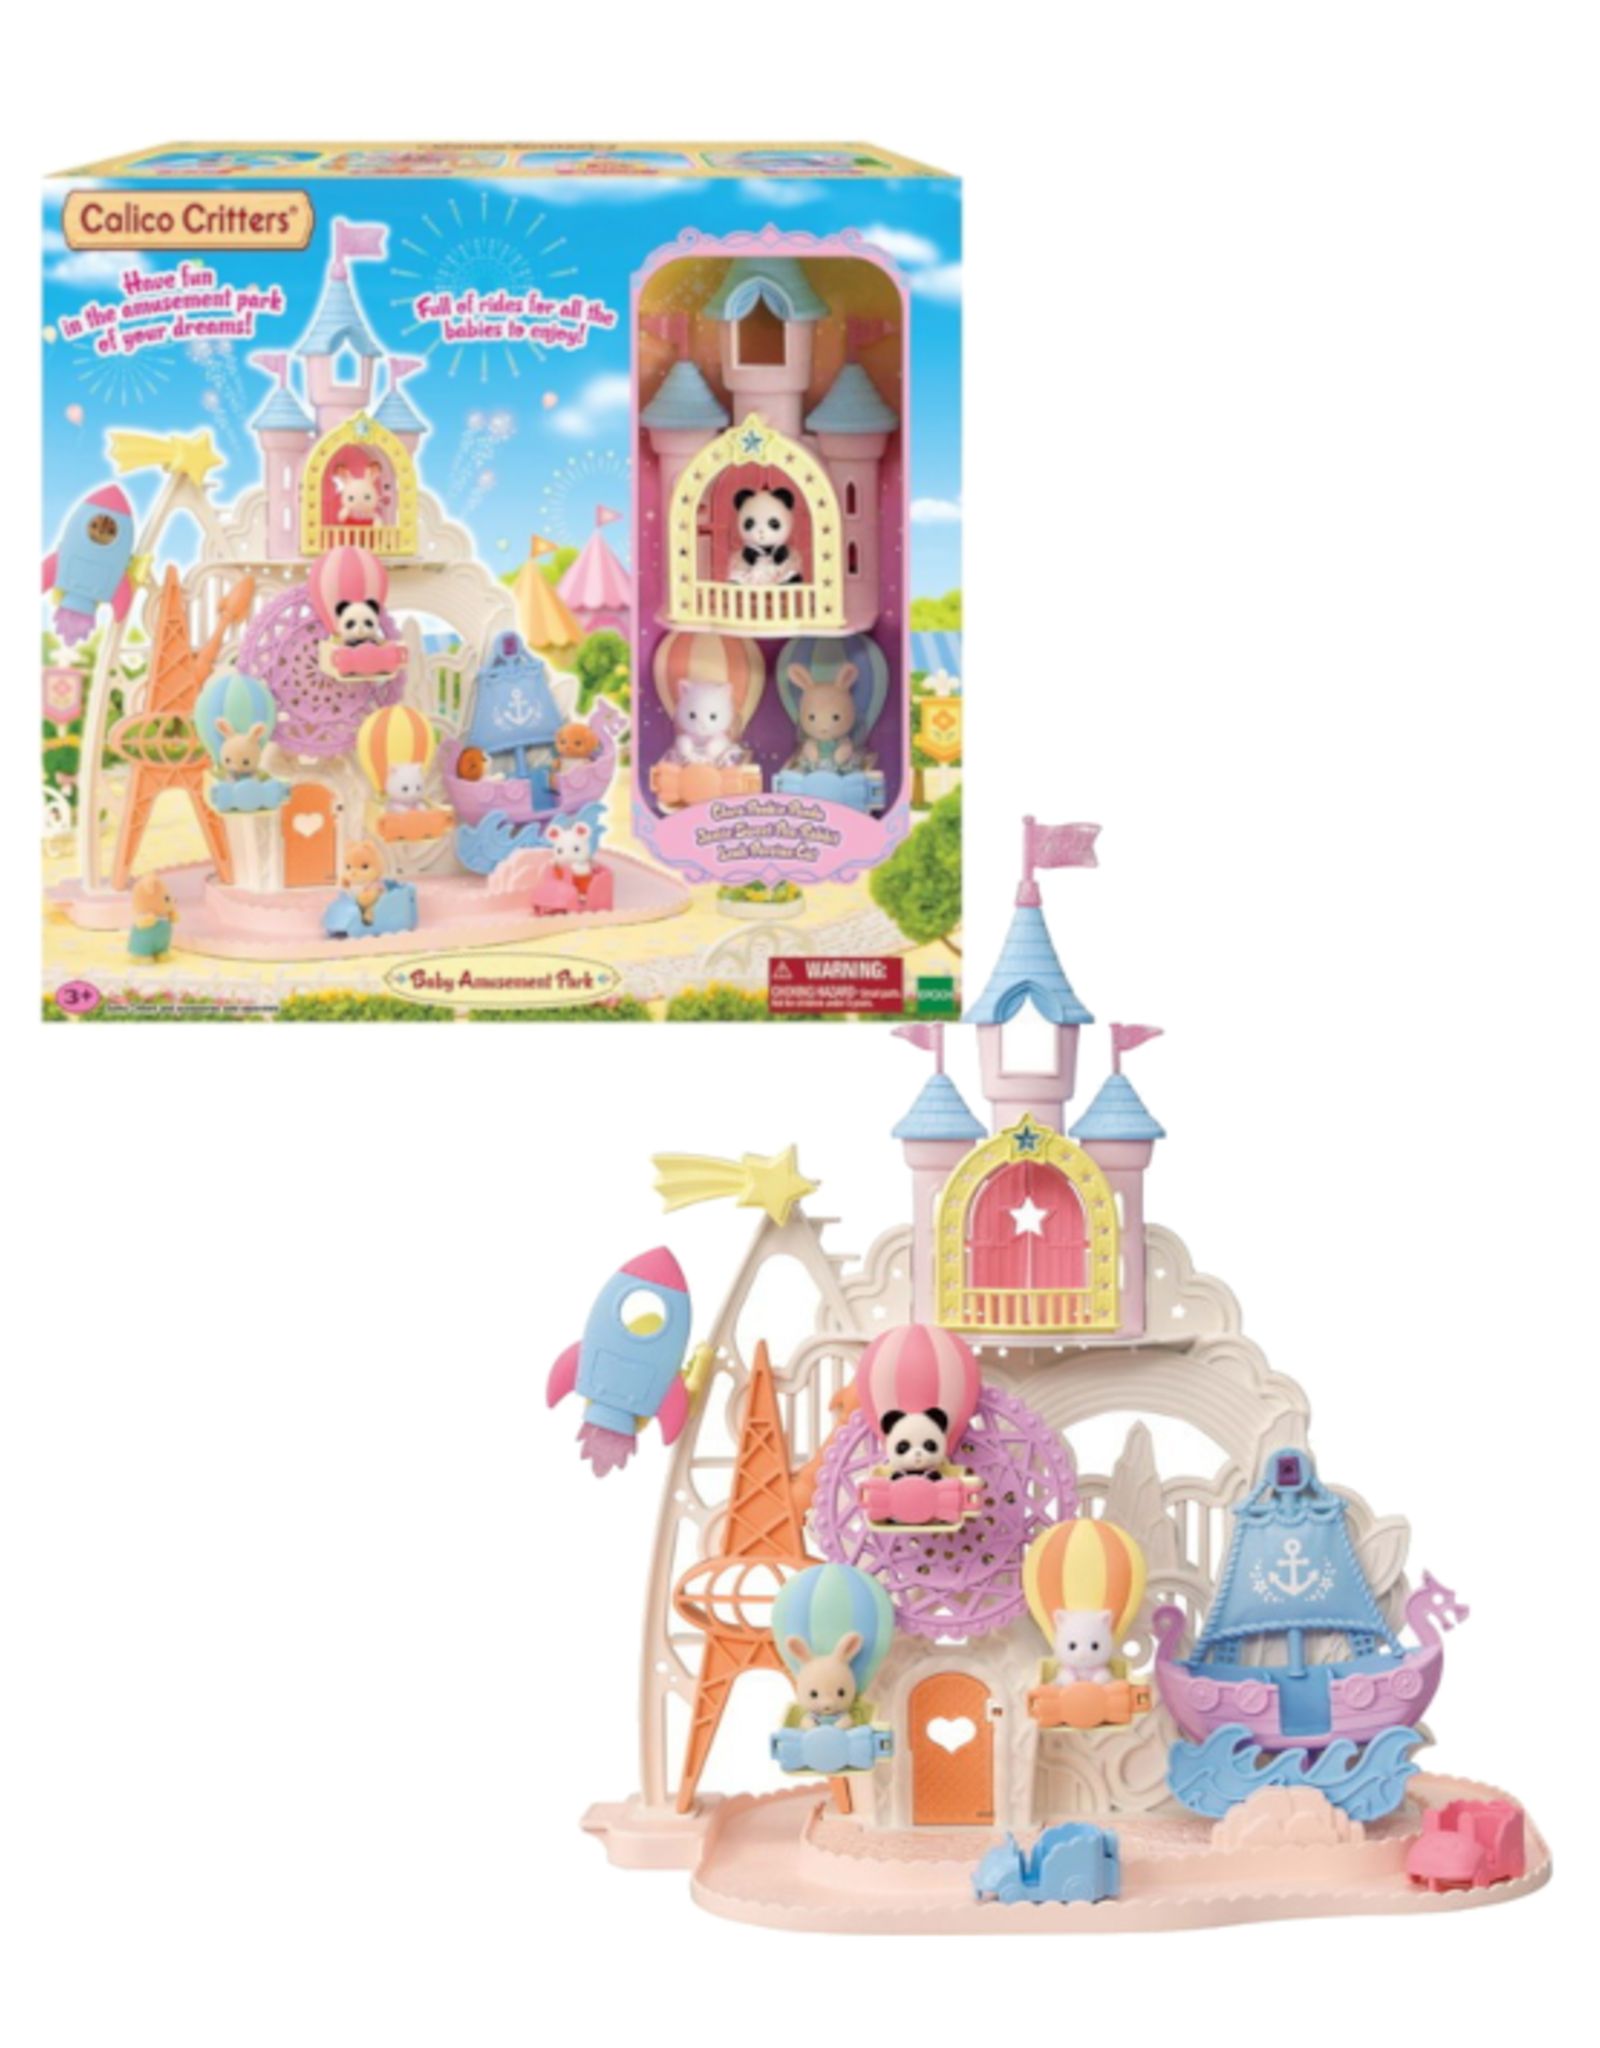 Calico Critters Calico Critters - Baby Amusement Park